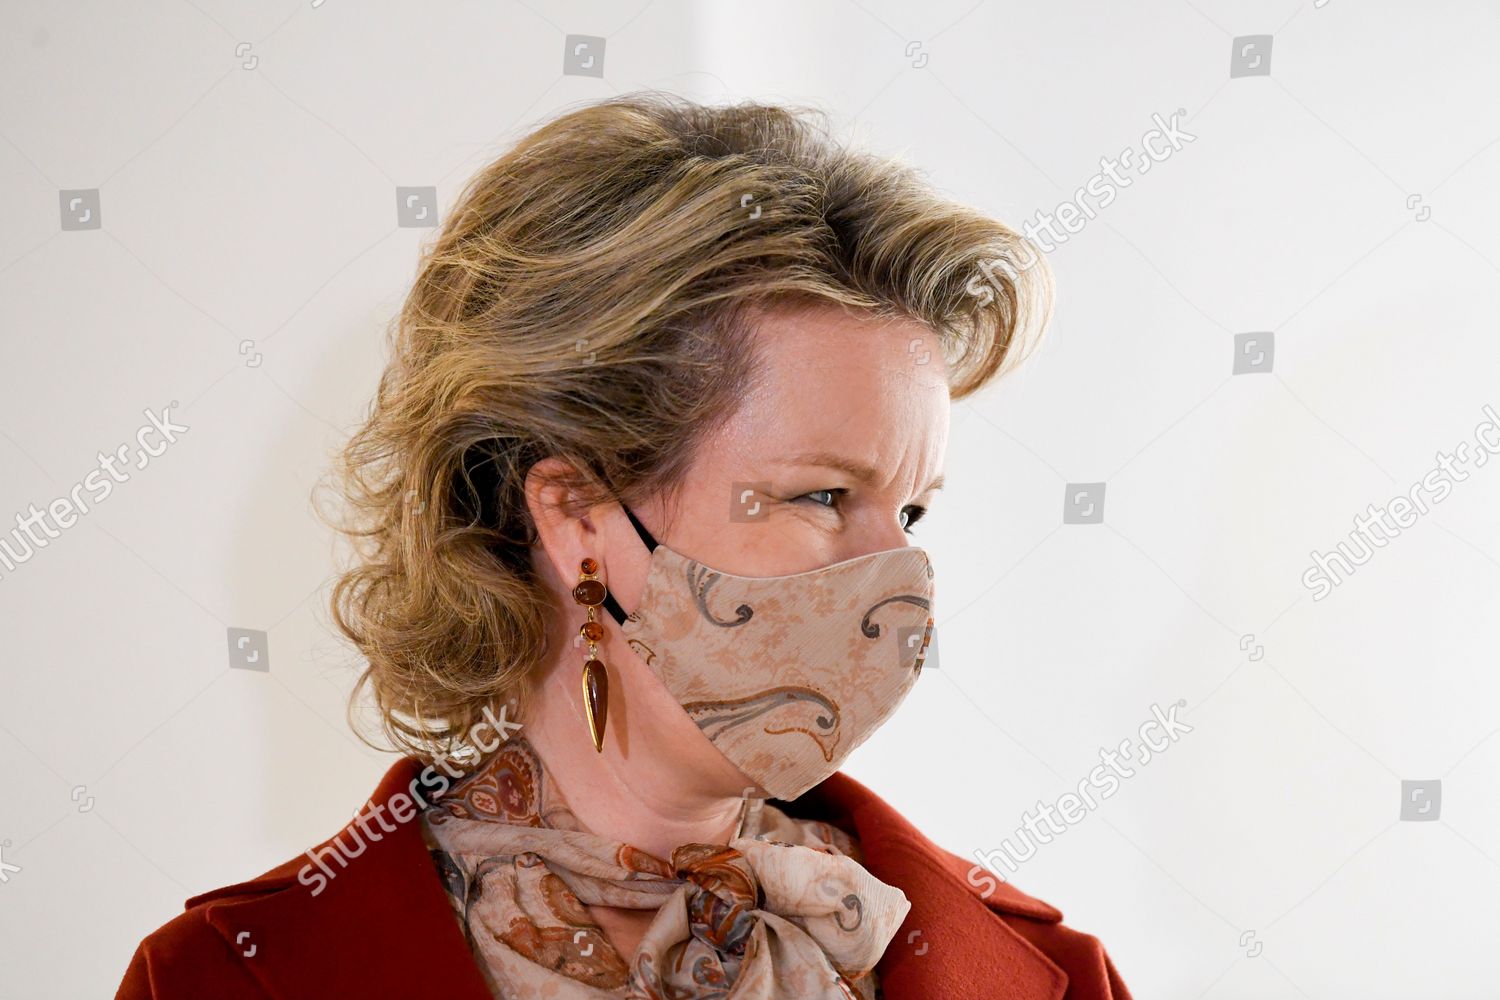 queen-mathilde-and-king-philippe-visit-the-province-of-luxembourg-vielsalm-belgium-shutterstock-editorial-12529850ag.jpg